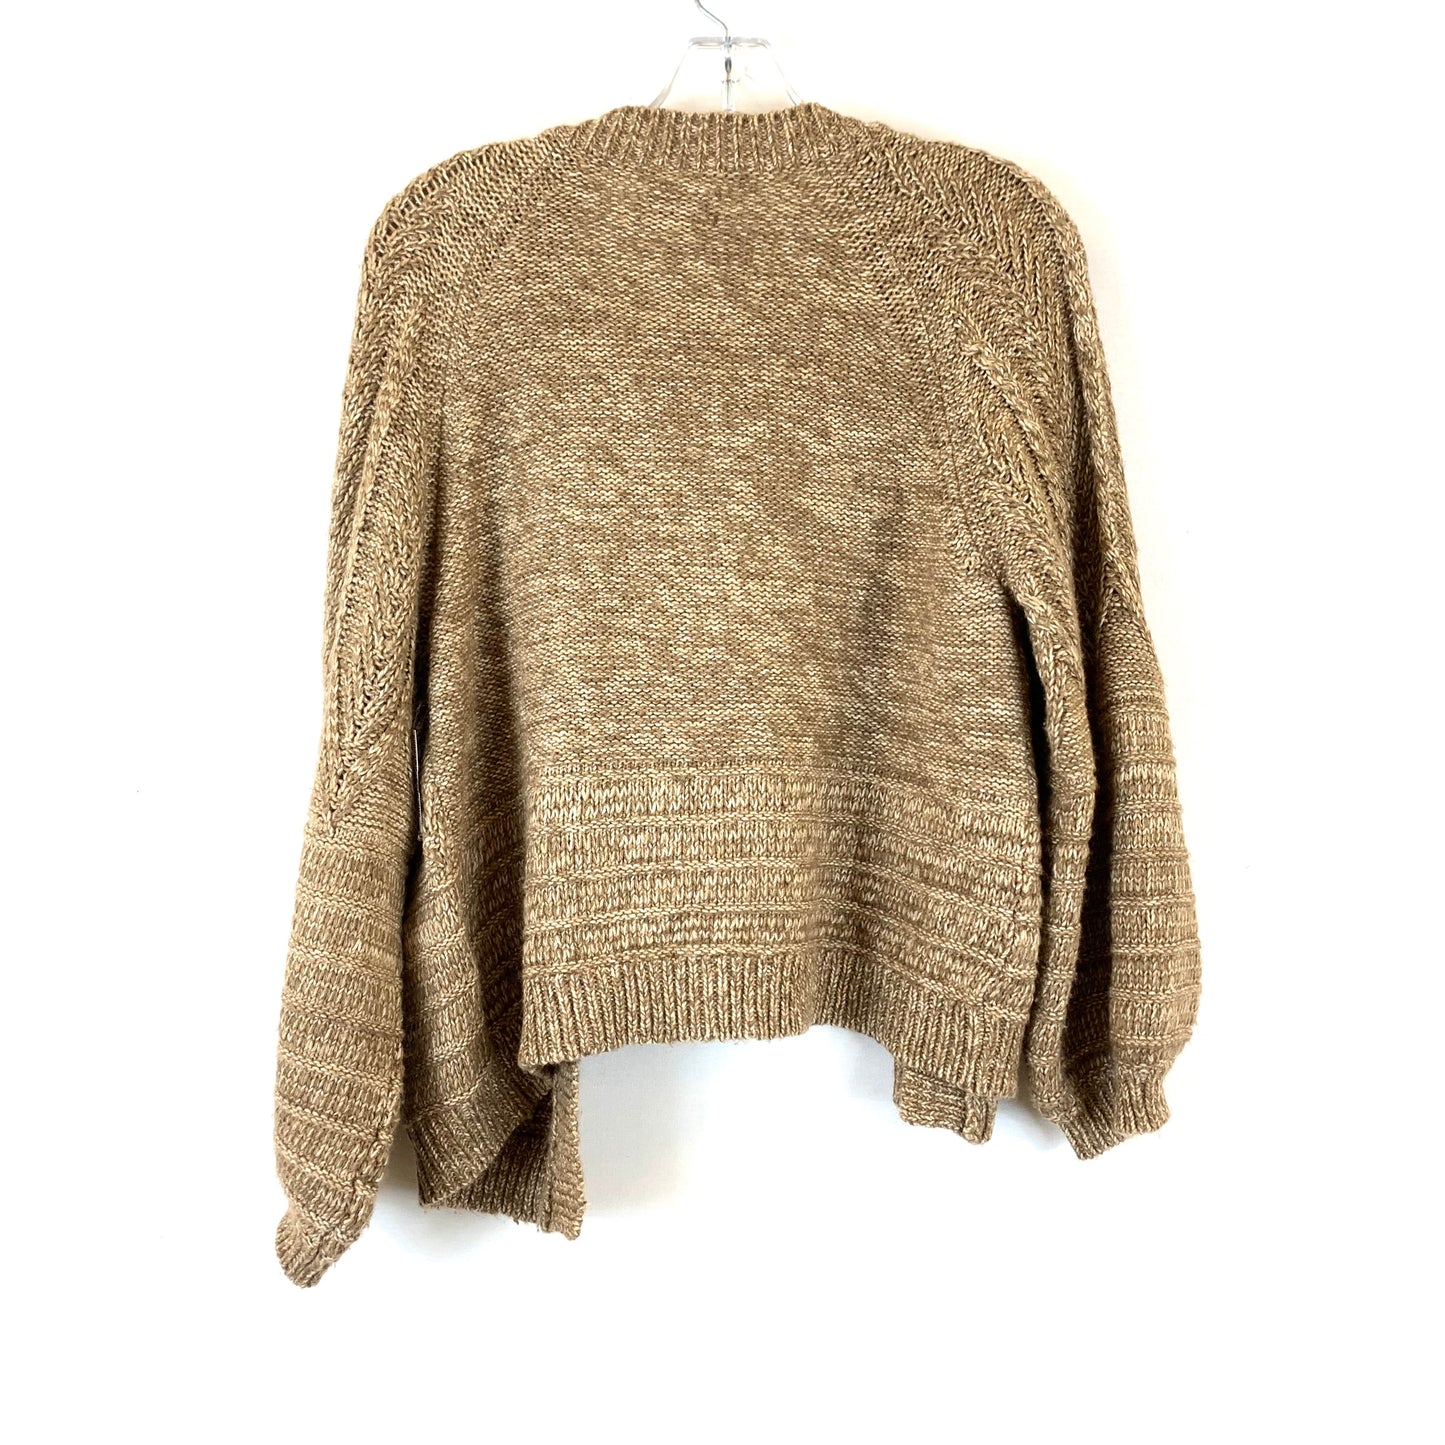 Sweater Cardigan By Lucky Brand  Size: S